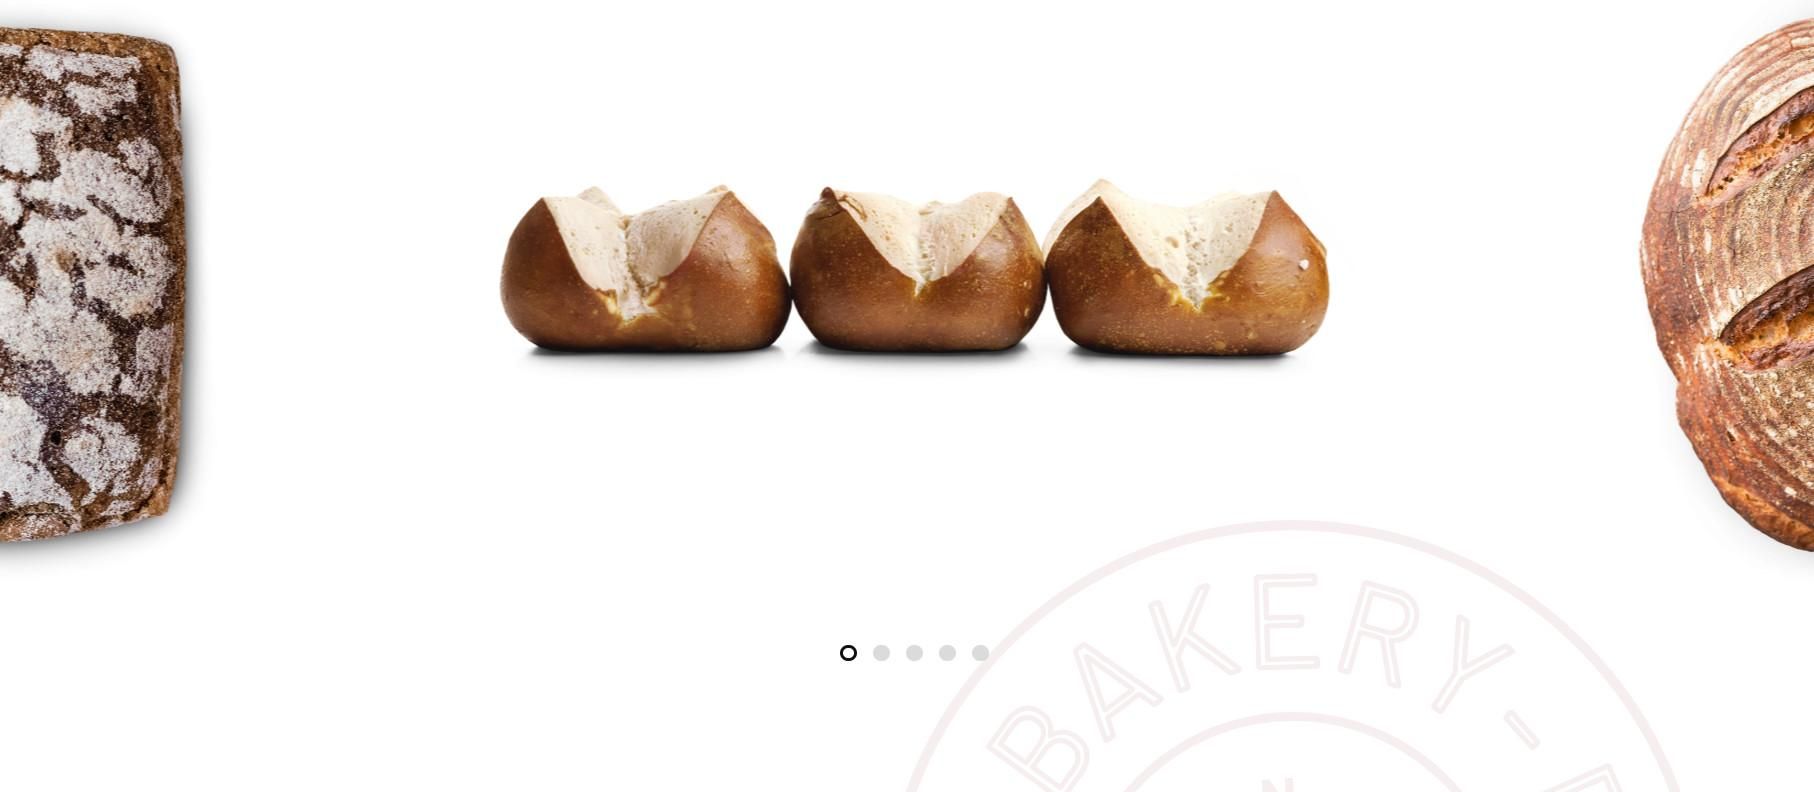 Web site design Bakery and dairy products